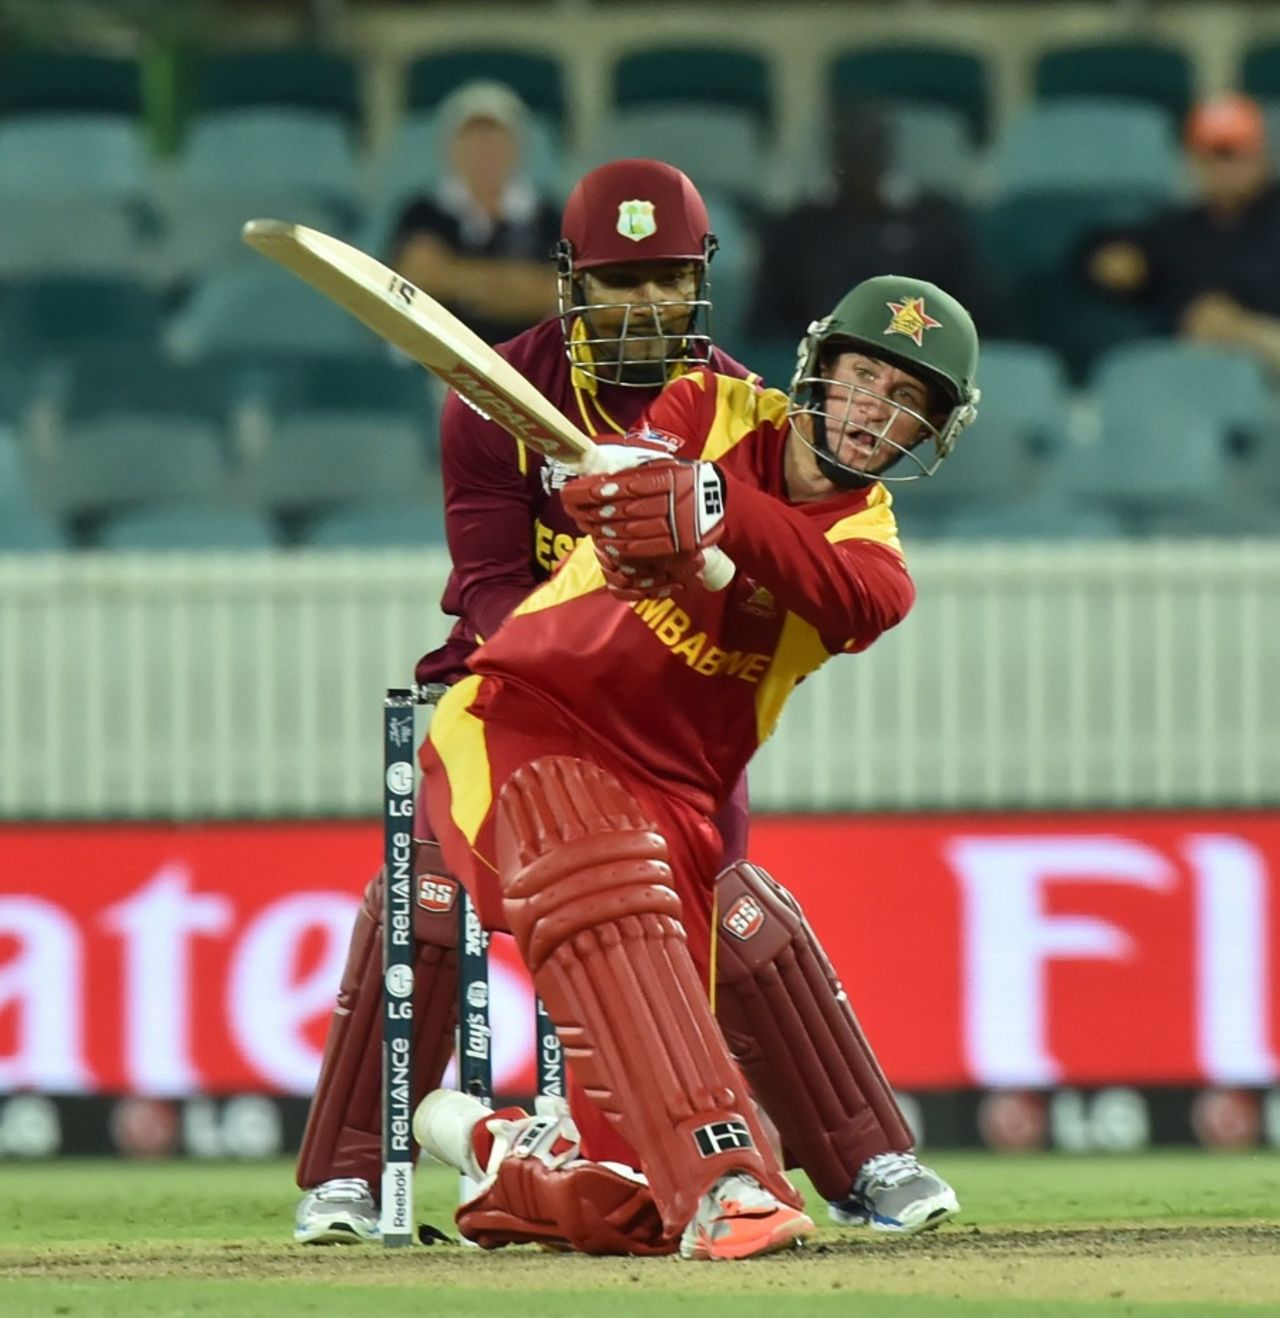 Sean Williams goes on the attack, West Indies v Zimbabwe, World Cup 2015, Group B, Canberra, February 24, 2015